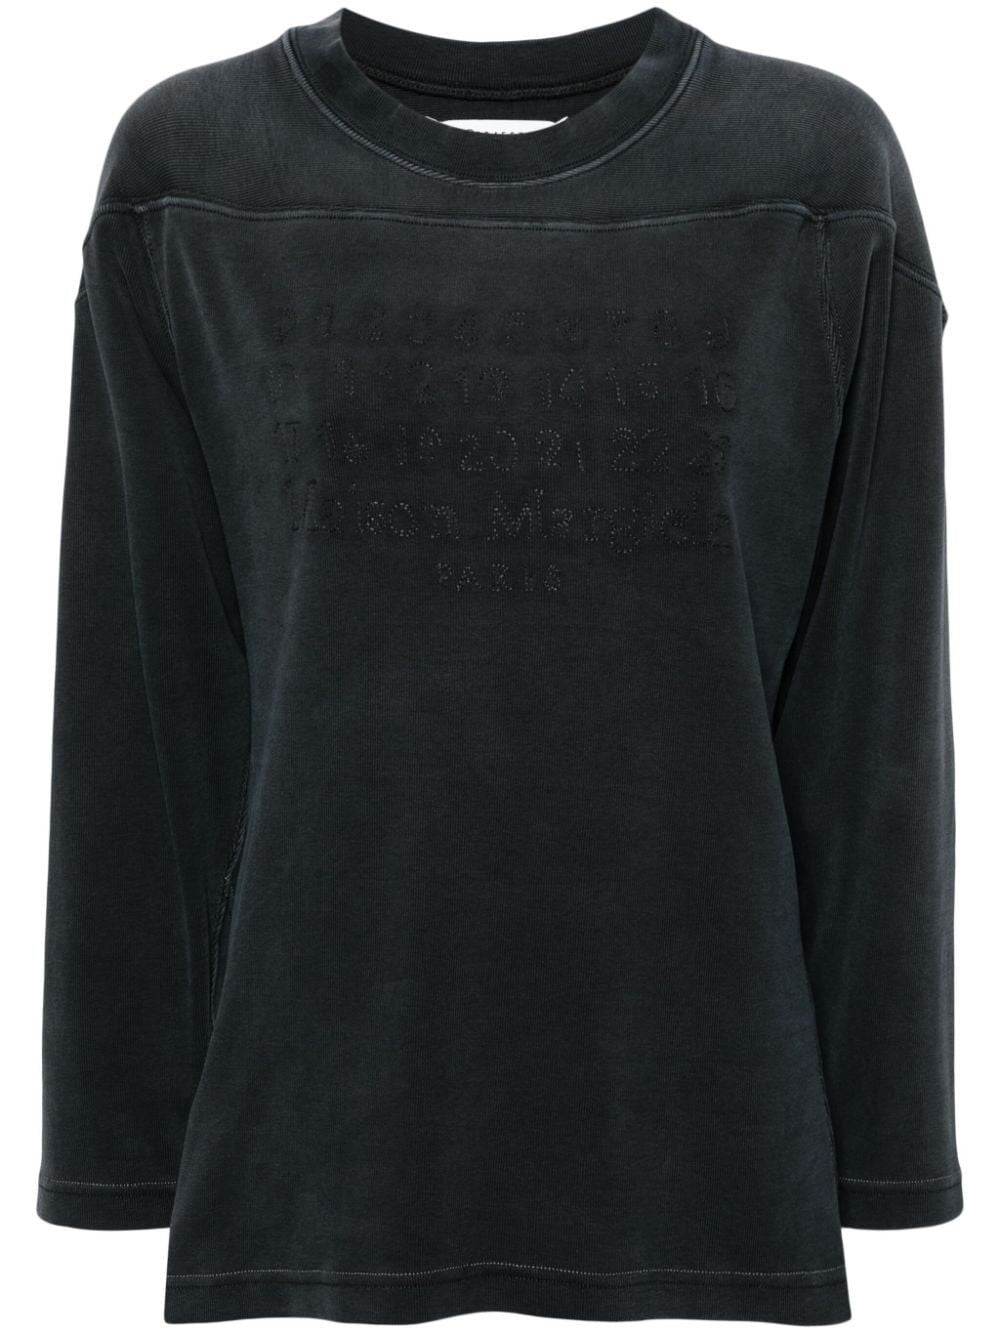 MAISON MARGIELA Embroidered Cotton Sweatshirt in Grey for Women - SS24 Collection